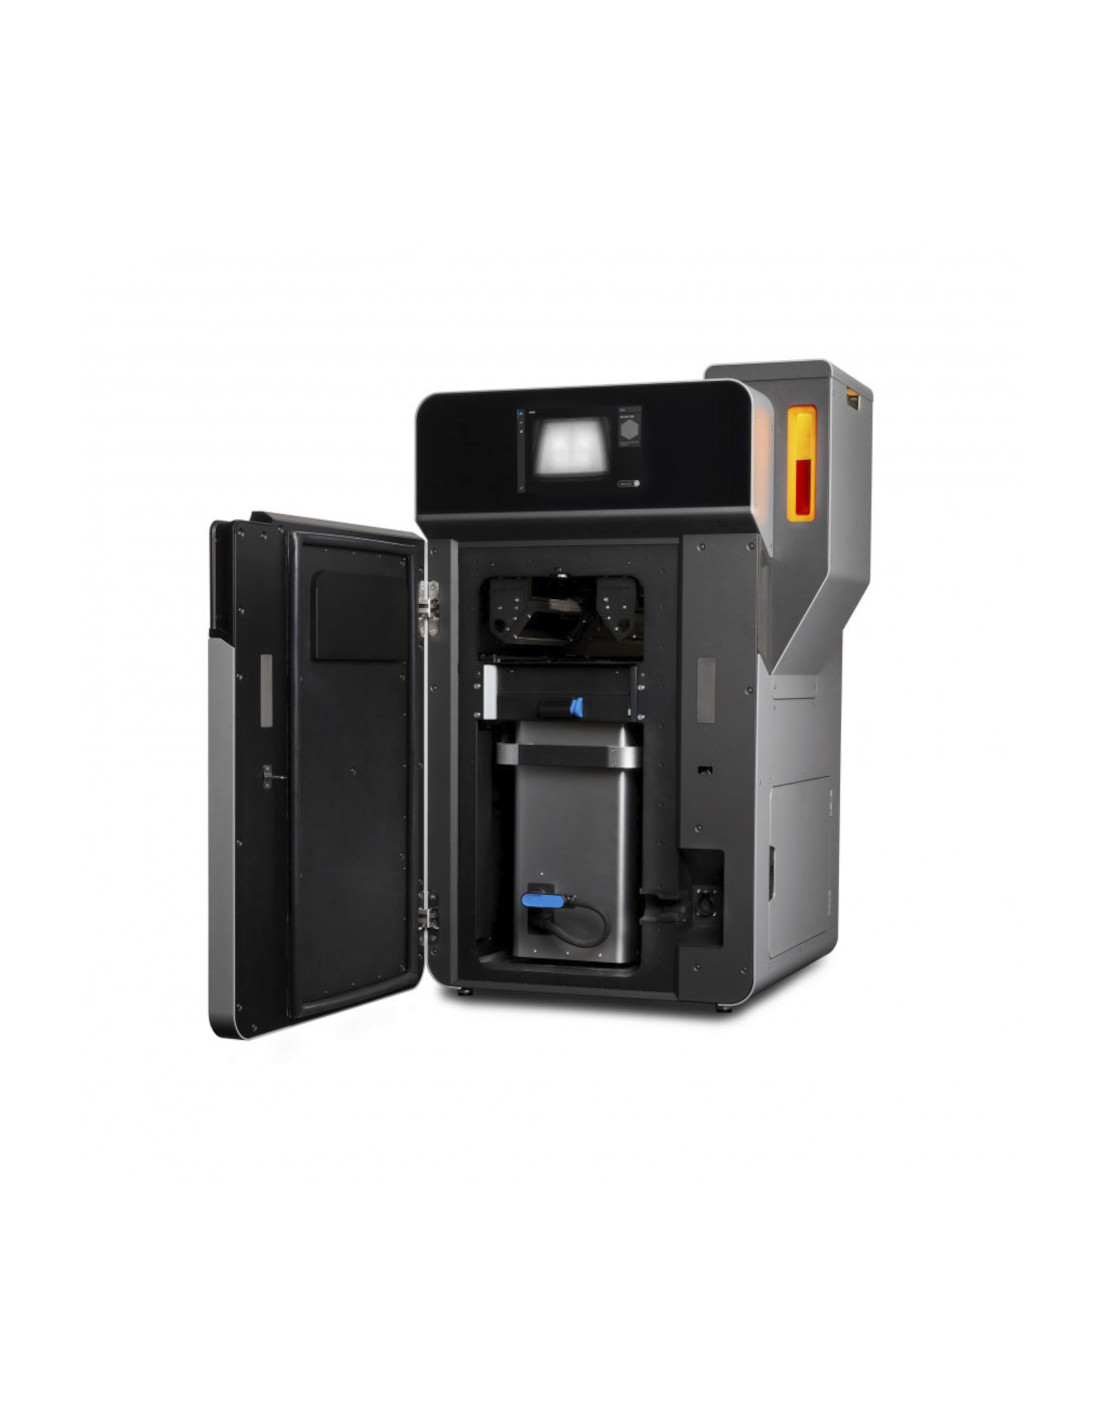 Pacote completo Formlabs Fuse 1+ 30W + SIFT - impressora 3D industrial